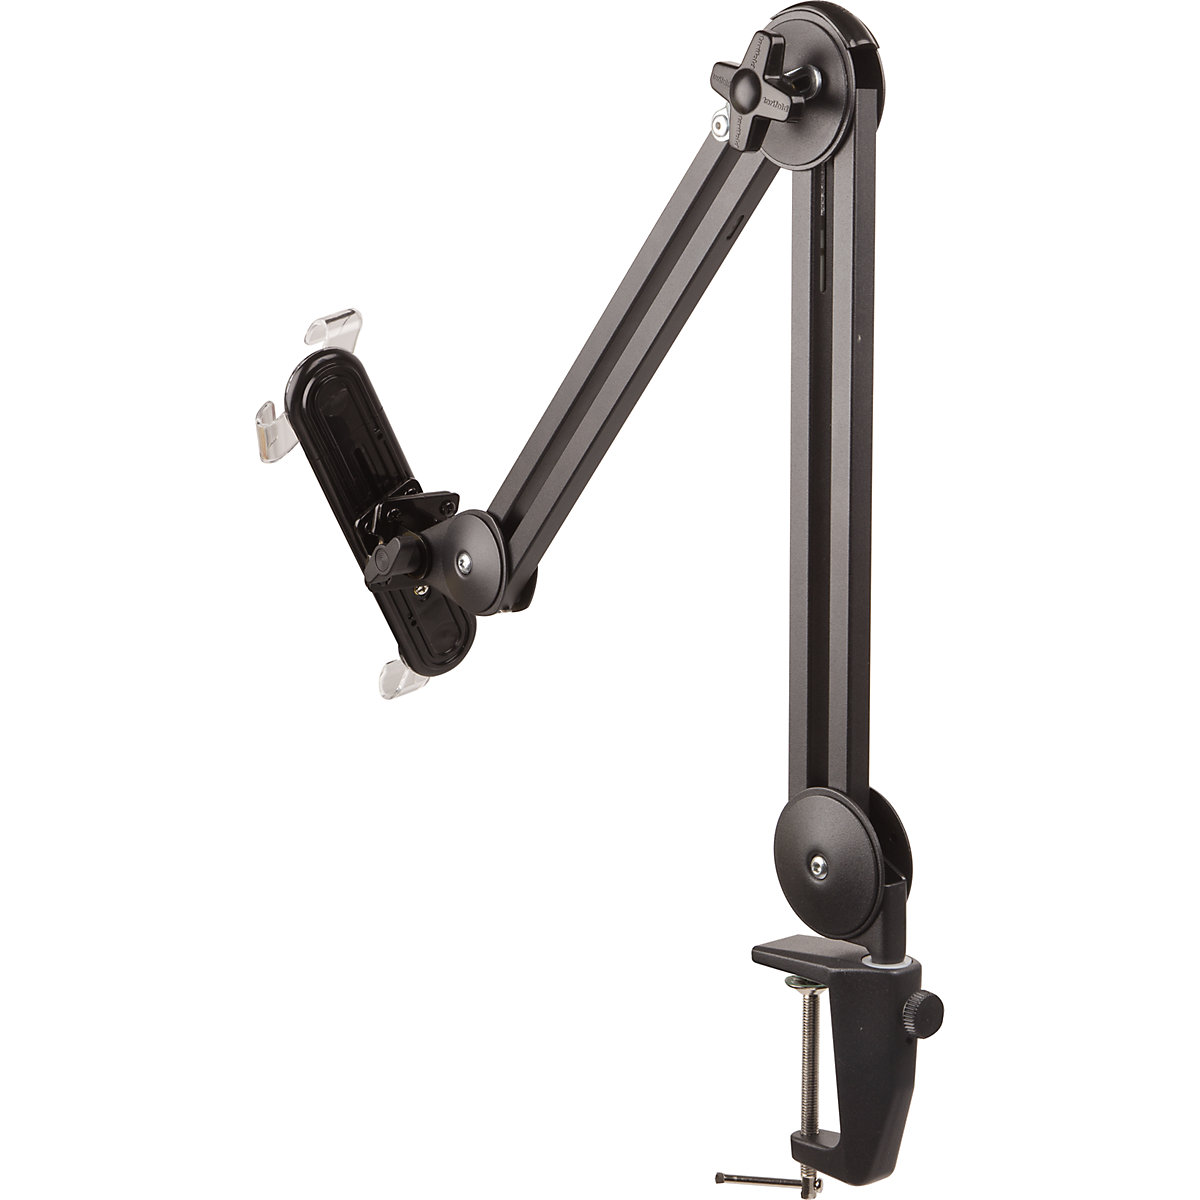 X-tend swivel arm for tablets – Tarifold